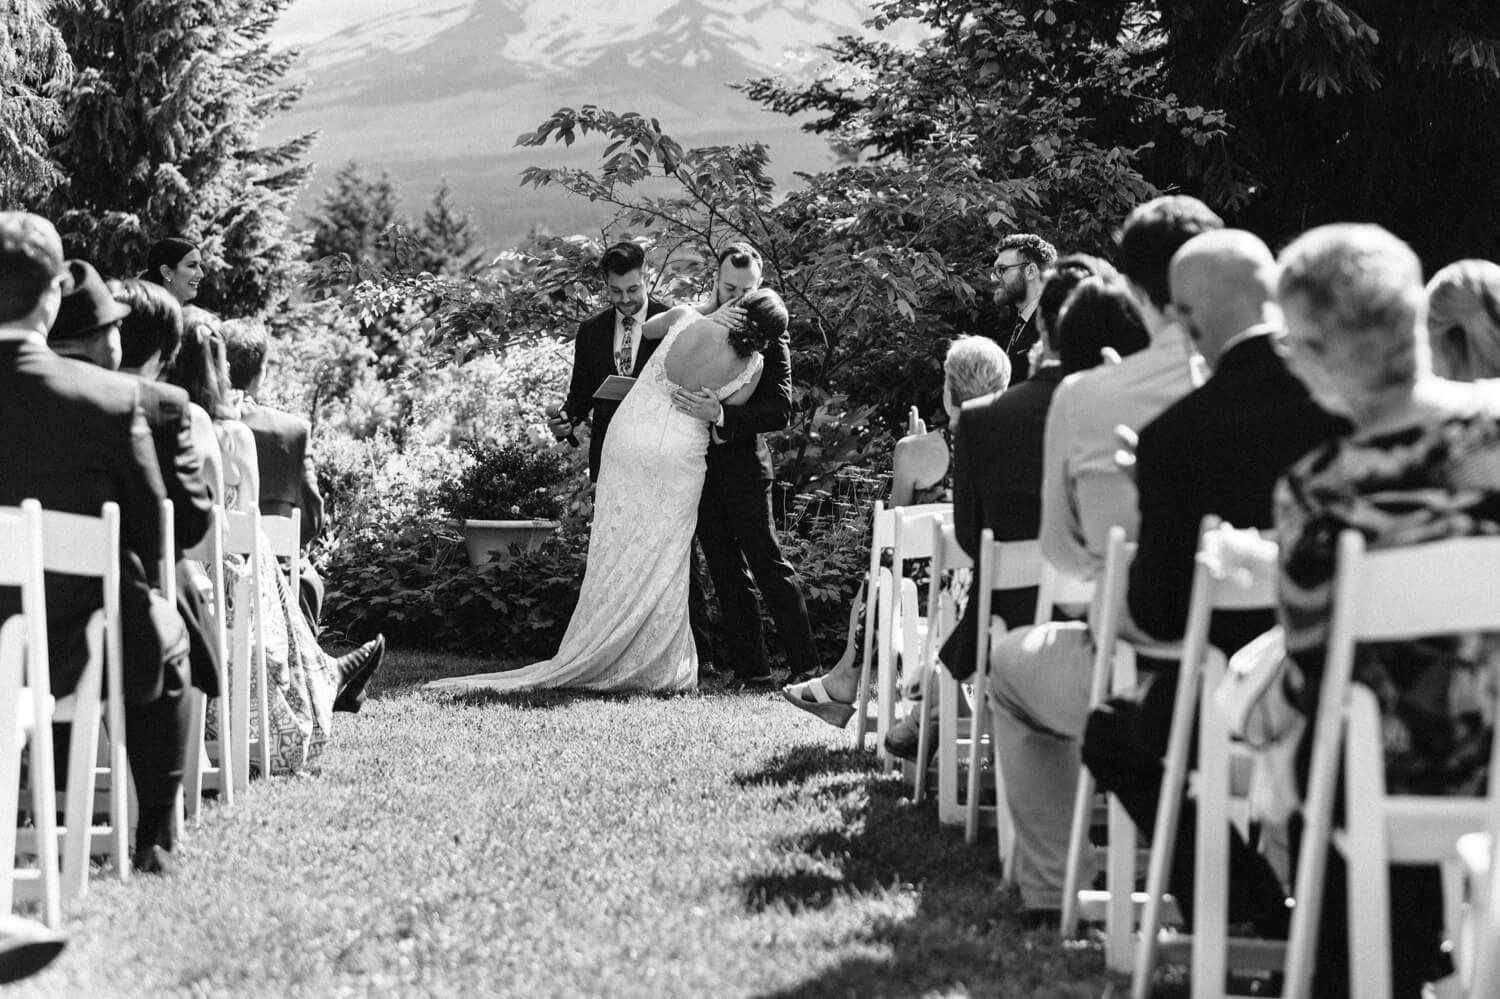 064_Mount Hood Organic Farms Wedding-Black and white photo of bride and groom kissing after ceremony.jpg